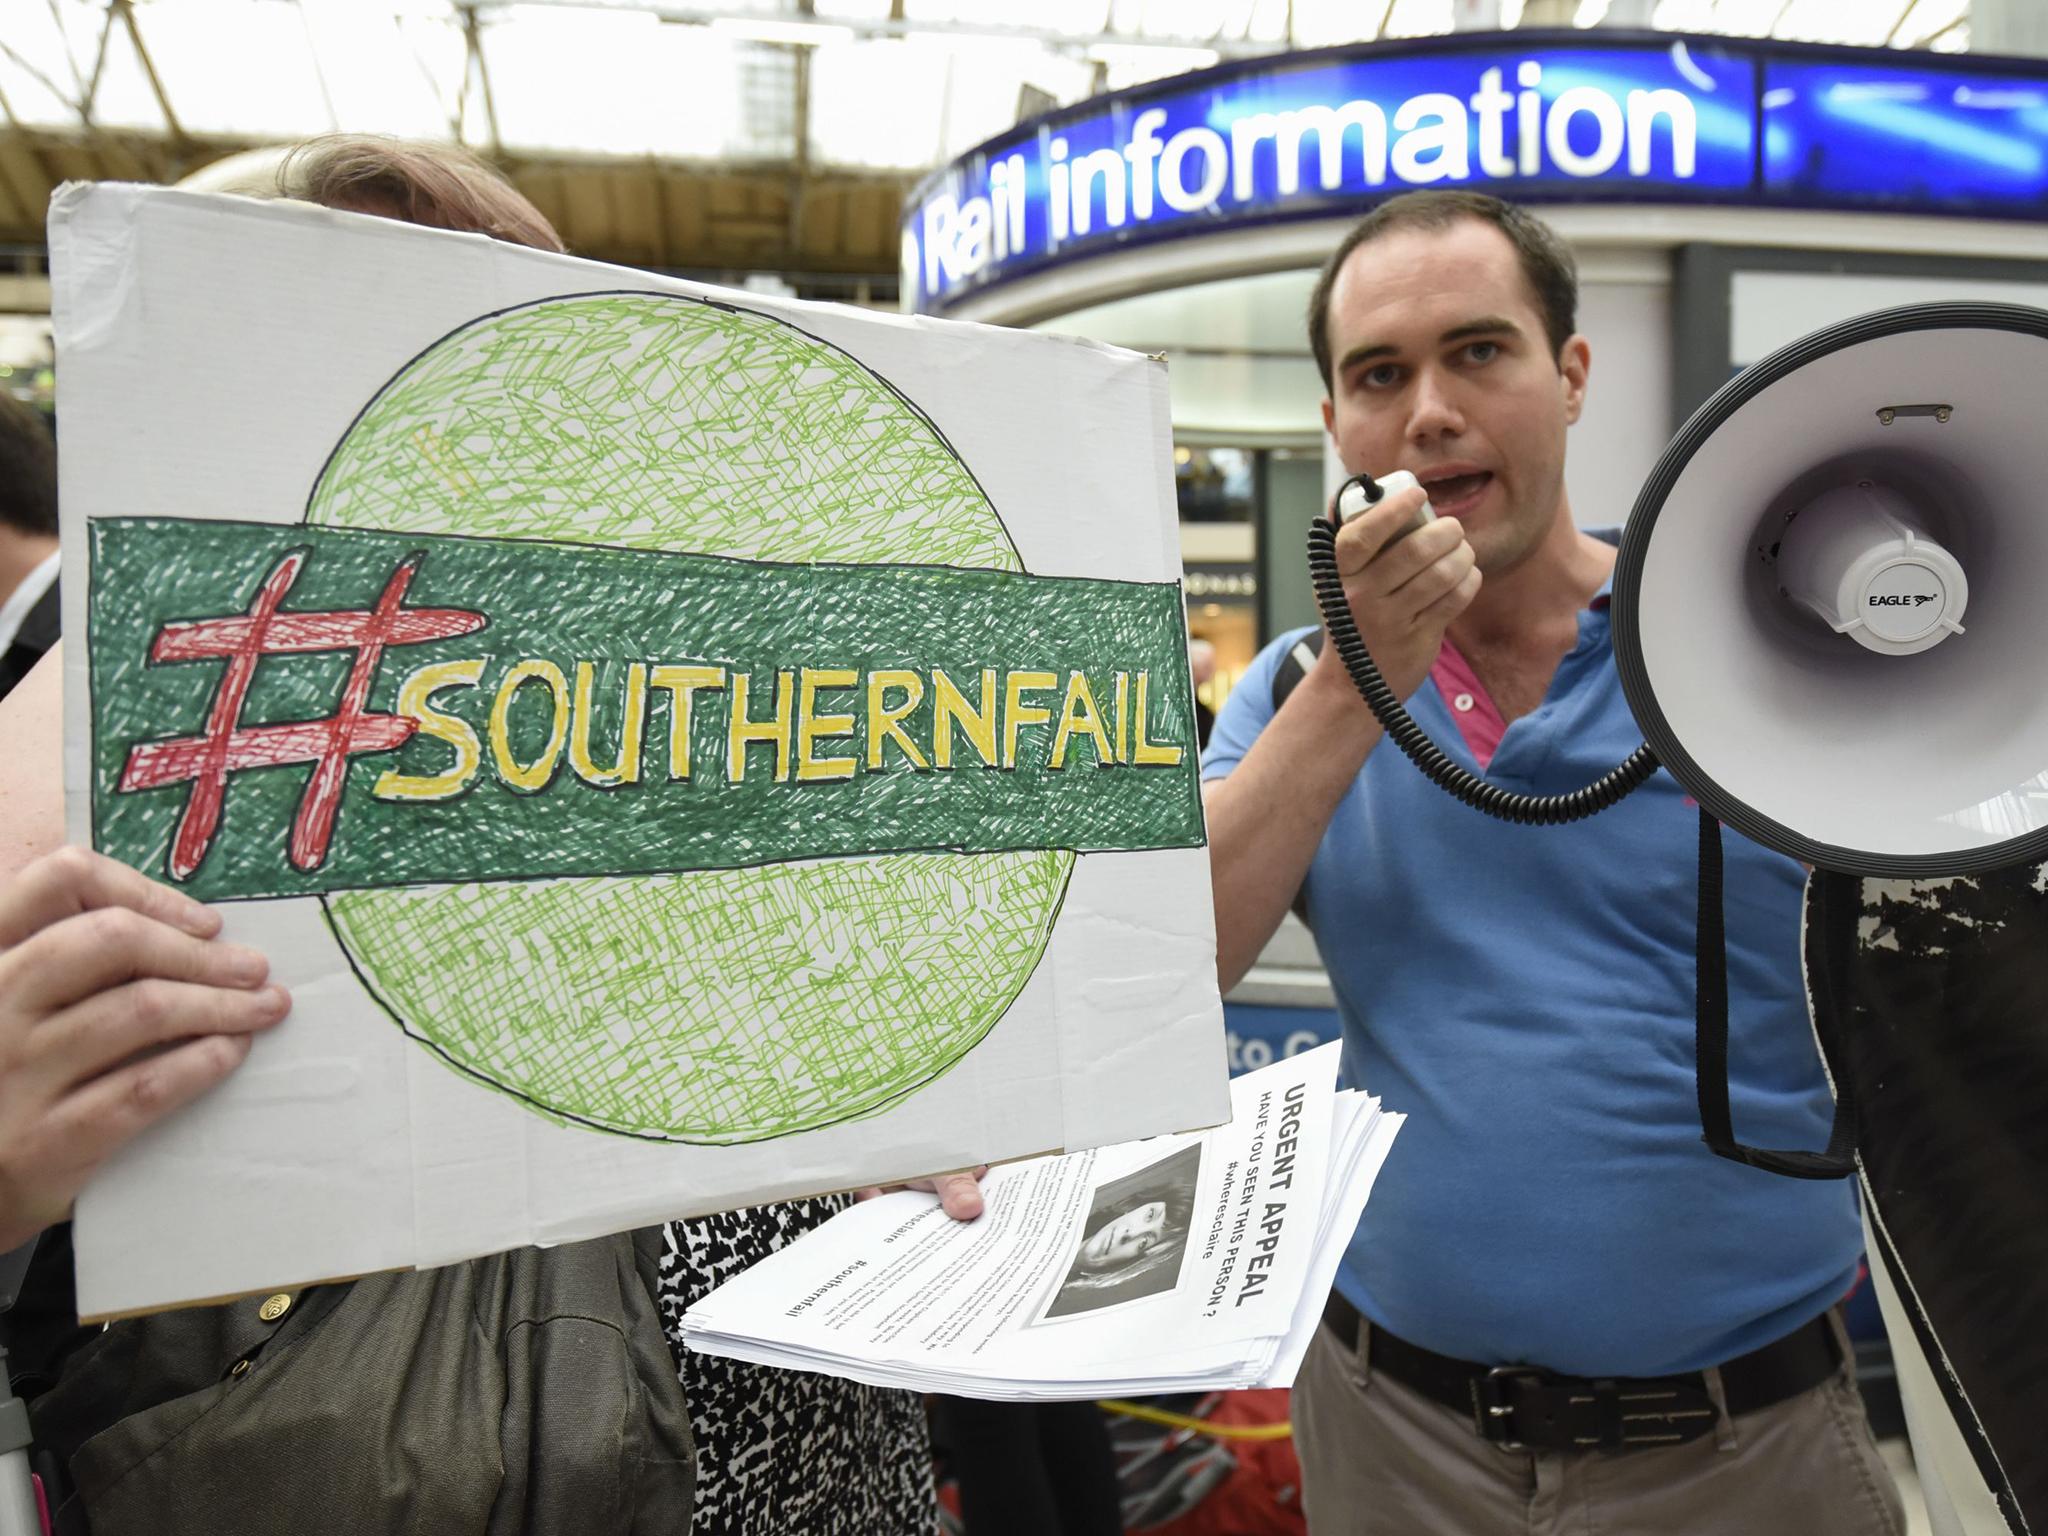 Passengers stage a ‘fare strike’ and protest at Victoria Station in central London in response to Southern Rail’s owner, Govia Thameslink Railway, cutting 341 trains a day